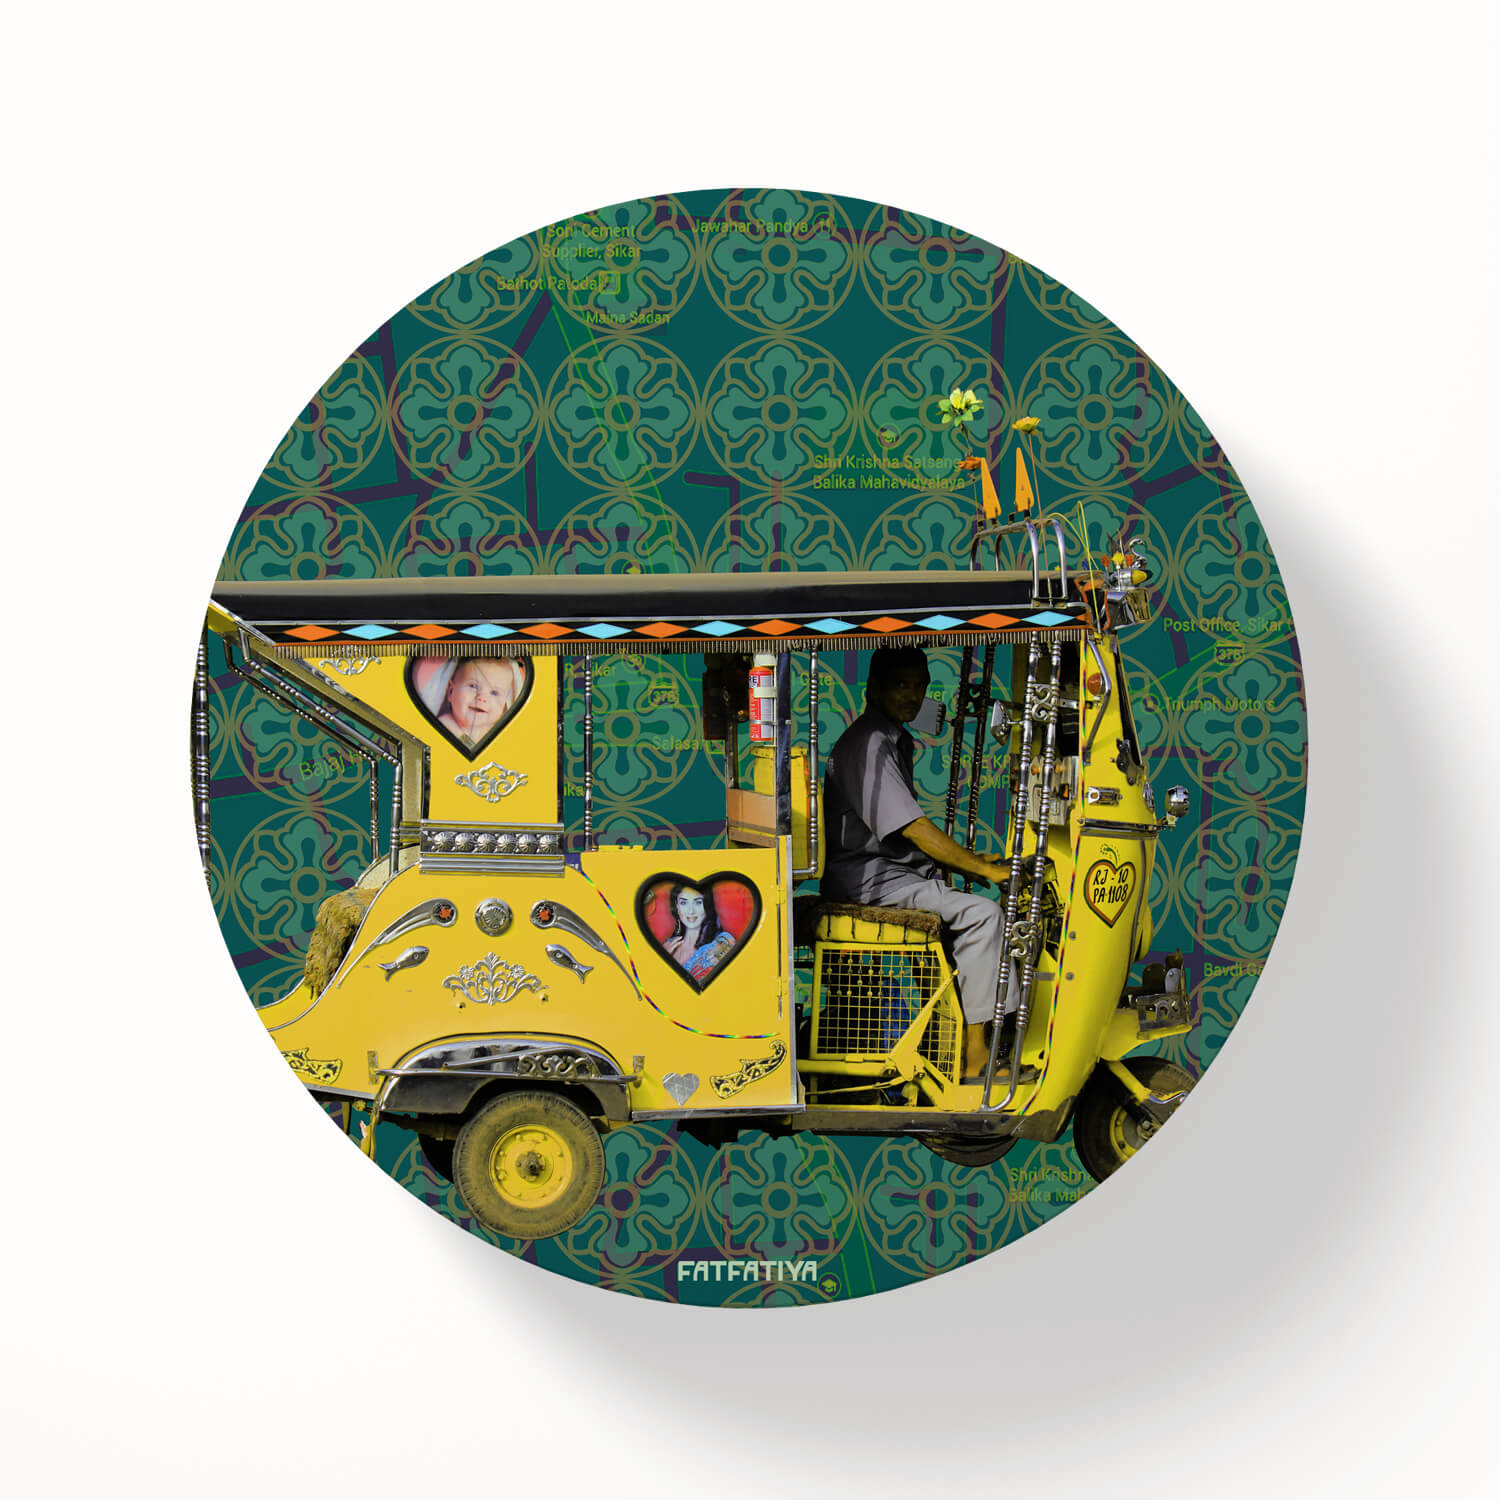 Shop Quirky Coasters Online at Best Price